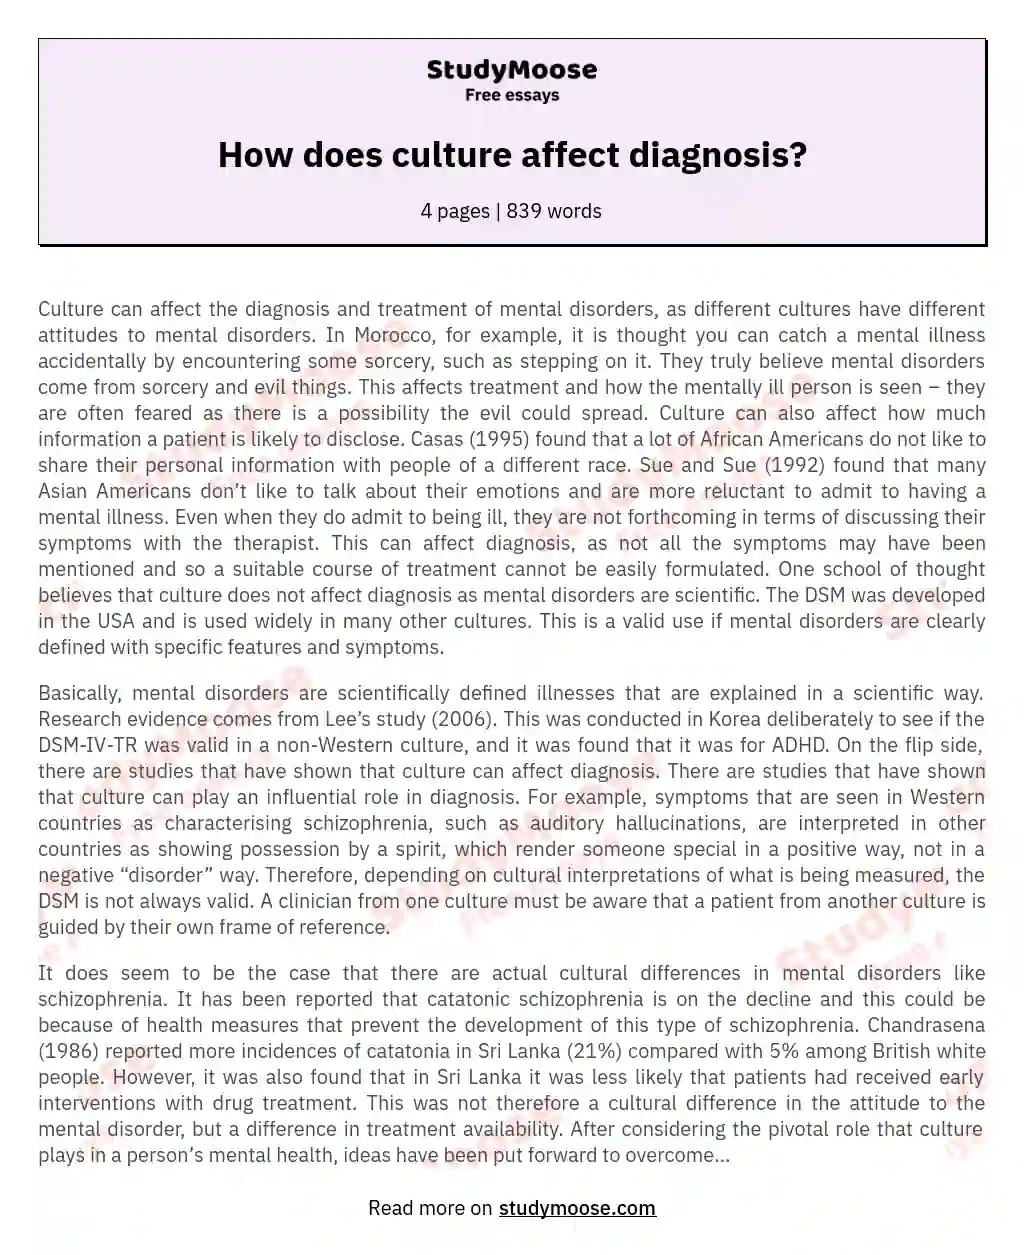 How does culture affect diagnosis?